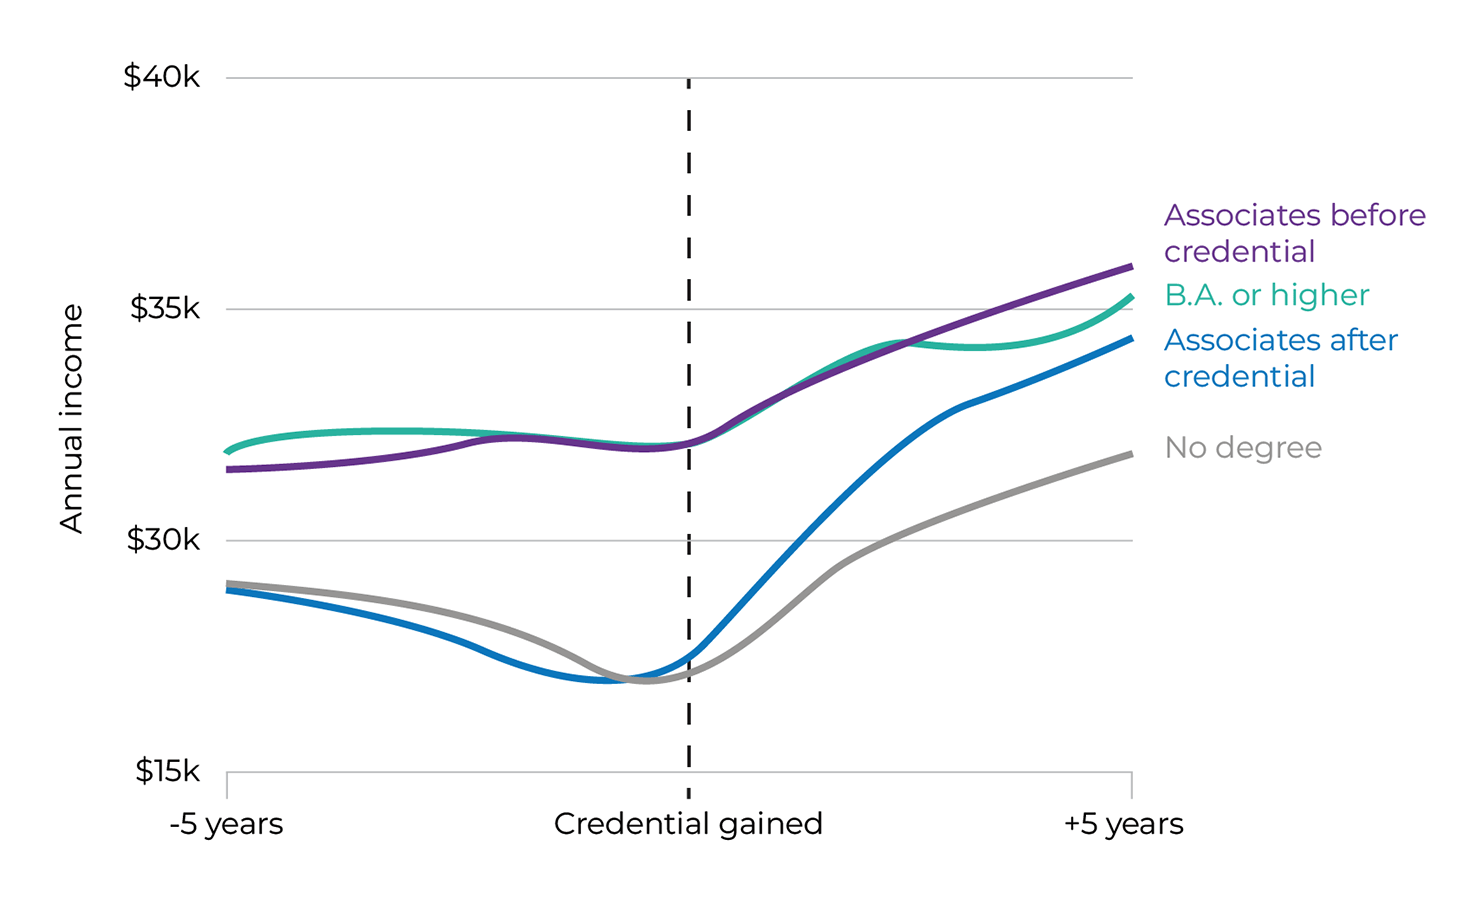 Credentialed-Earnings-After-Degree-Graph